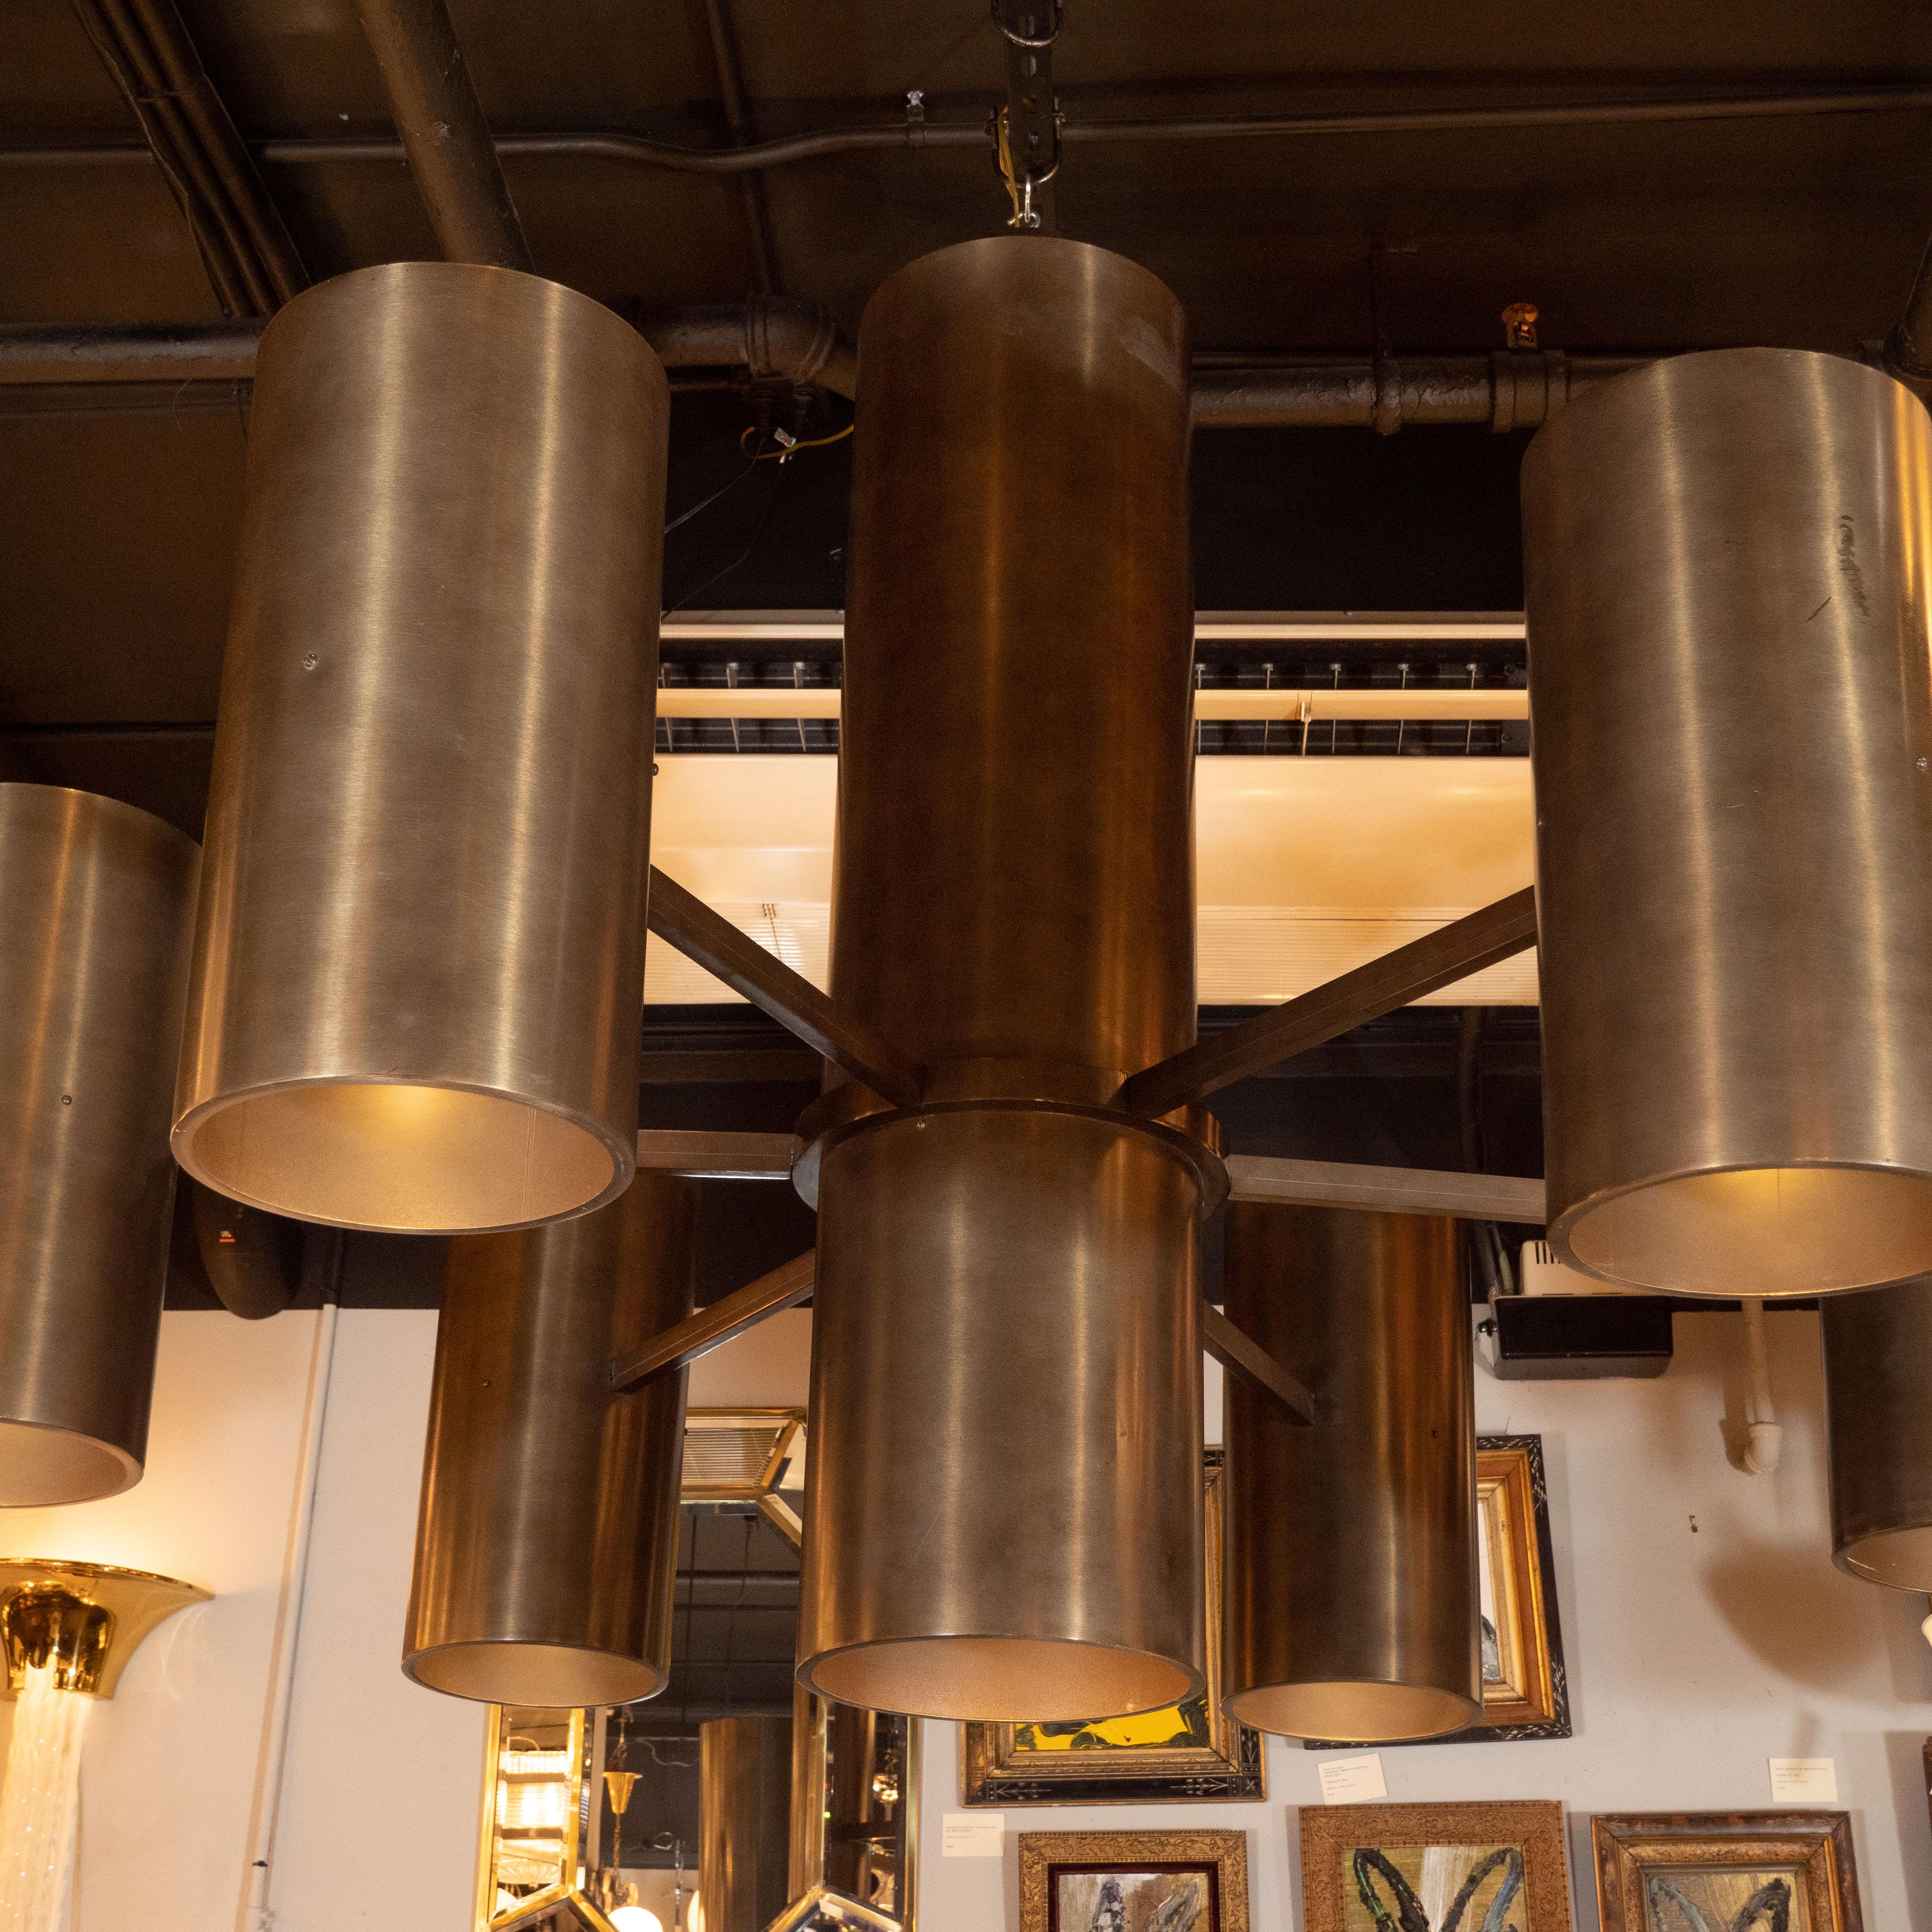 This impressive monumental Minimalist chandelier originally hung in the iconic Sea Cliff library in New York. It features six tubular shades emanating from a cylindrical body via rectangular supports all in oil rubbed bronze. Large scale, sleek and